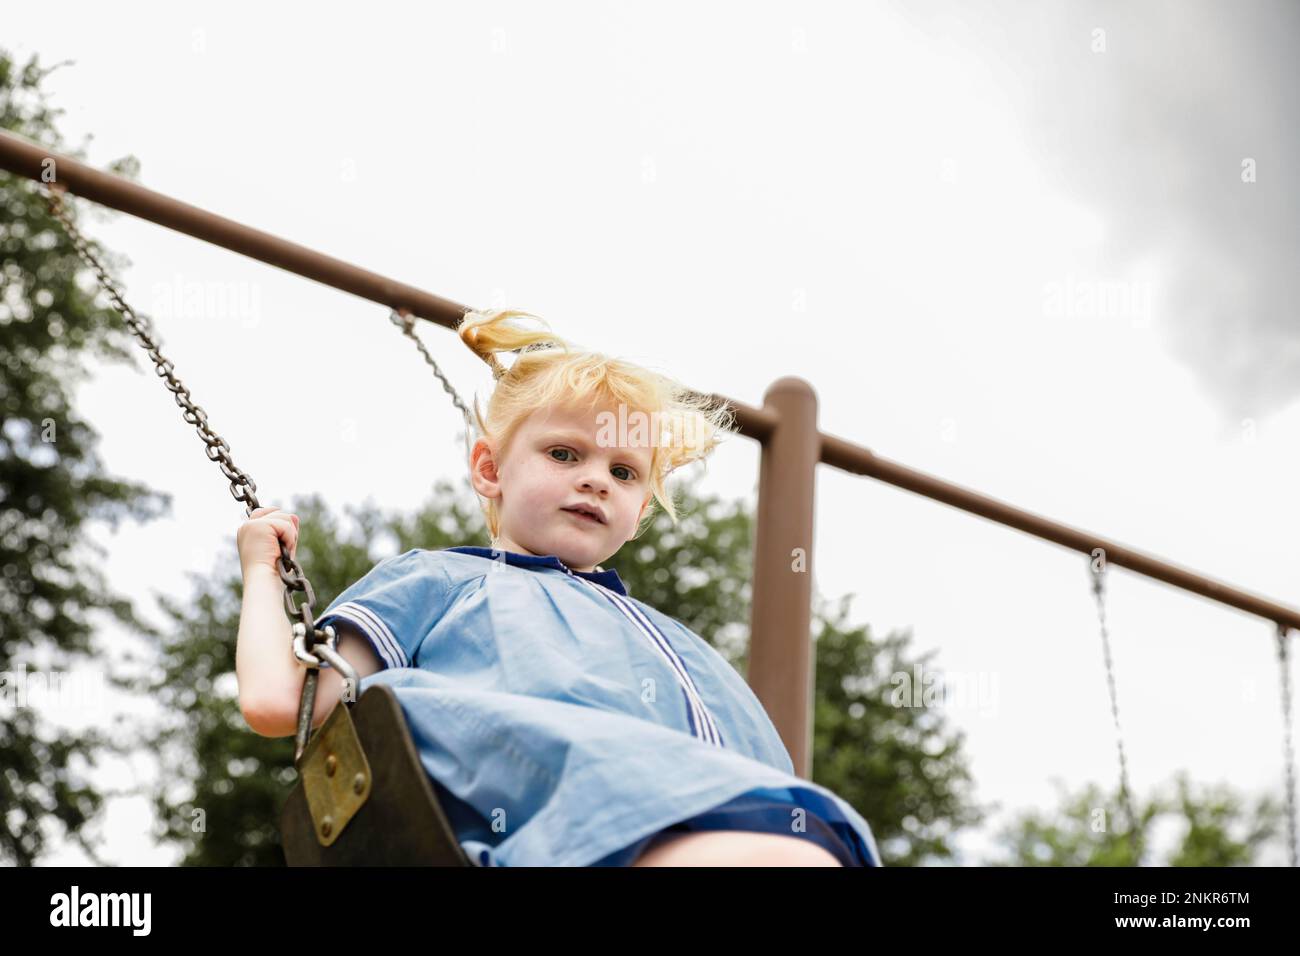 Girl swinging on swing in play park Stock Photo